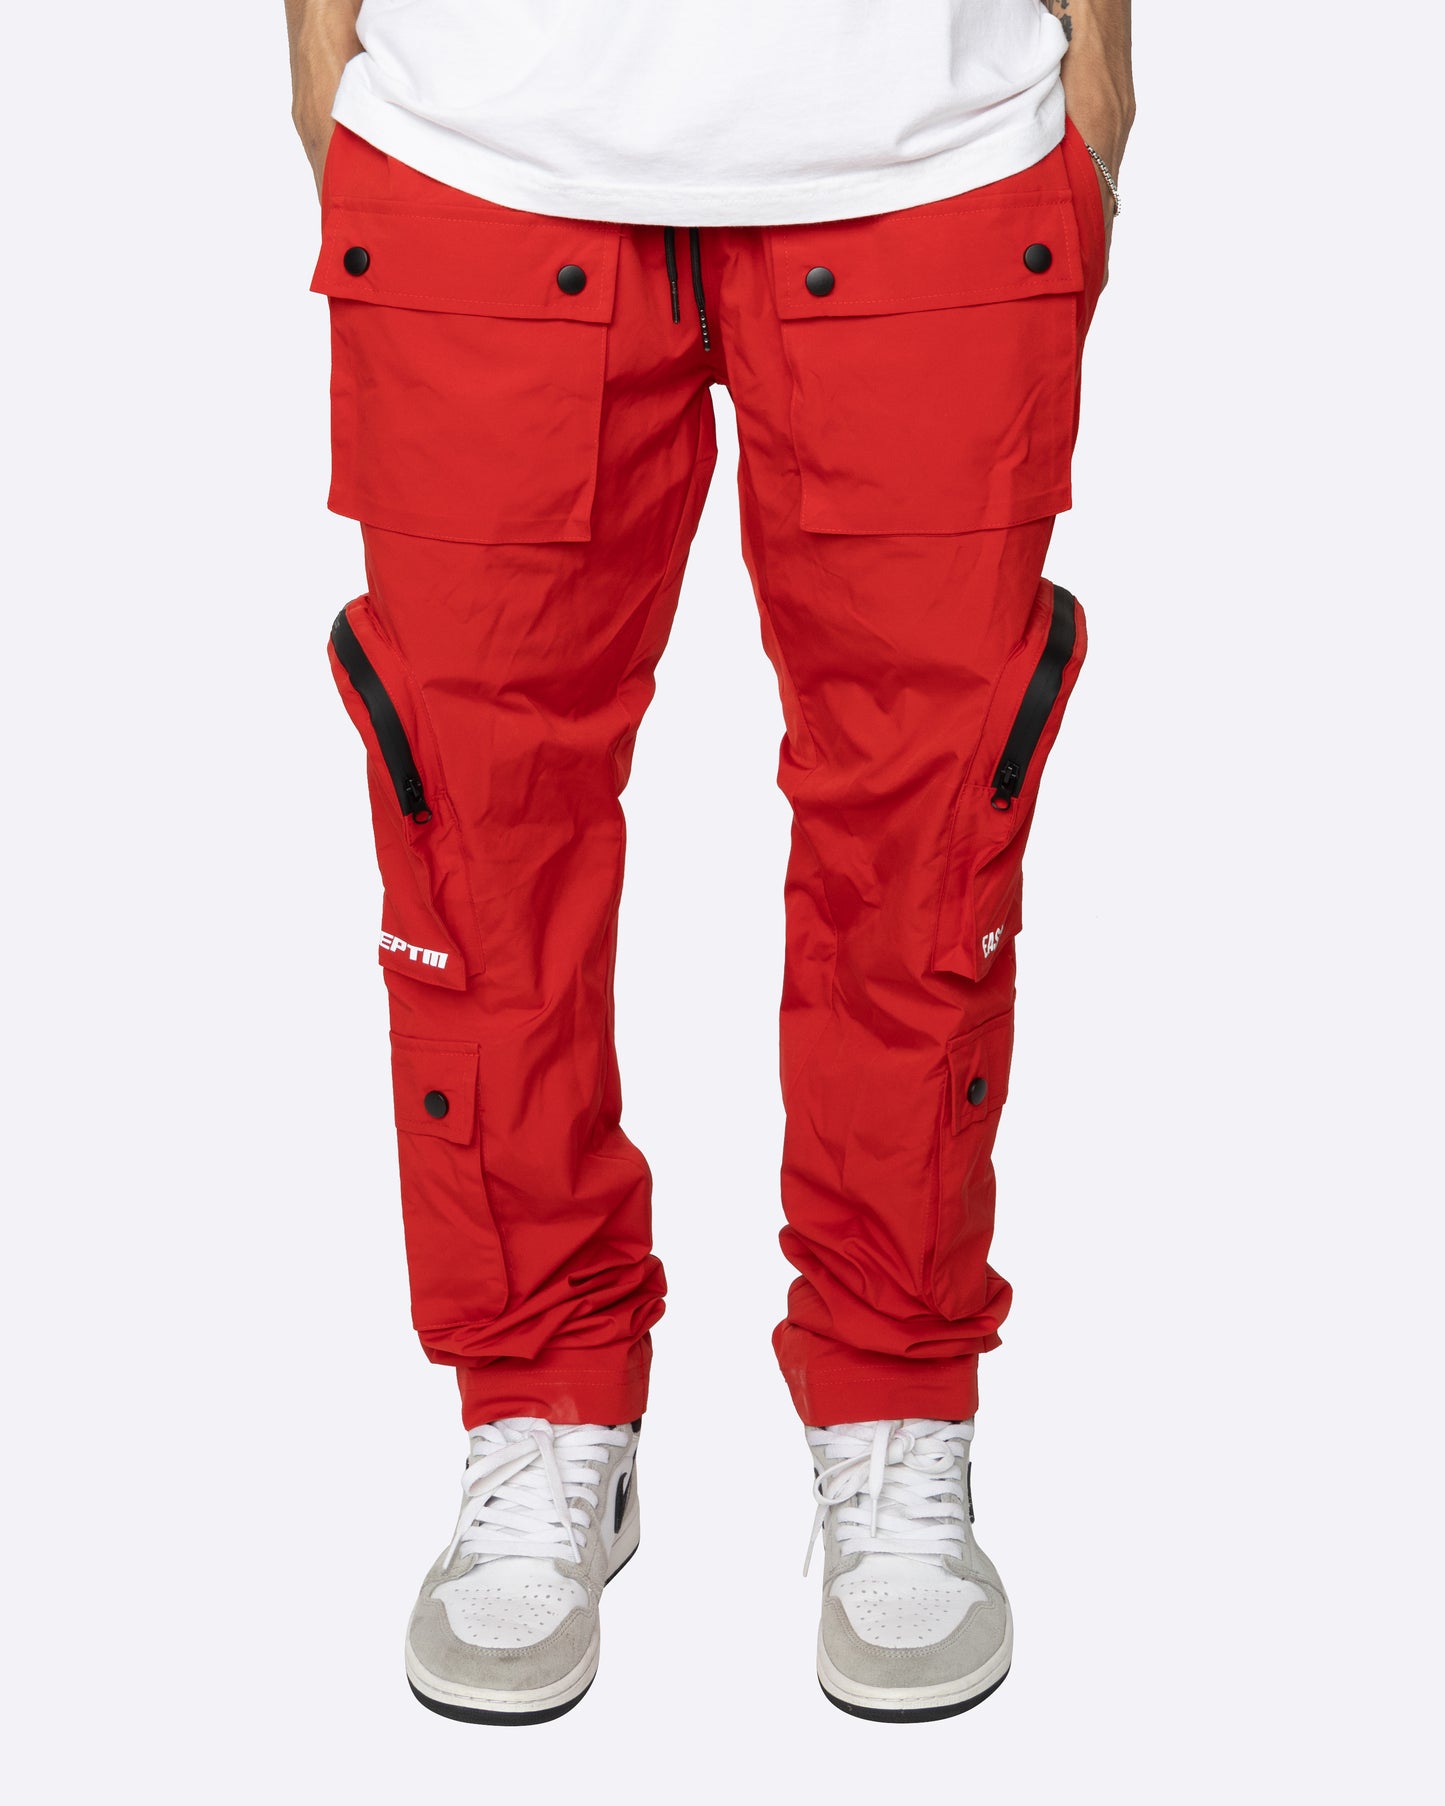 DAVE EAST "DOPE BOY" CARGO PANTS- RED